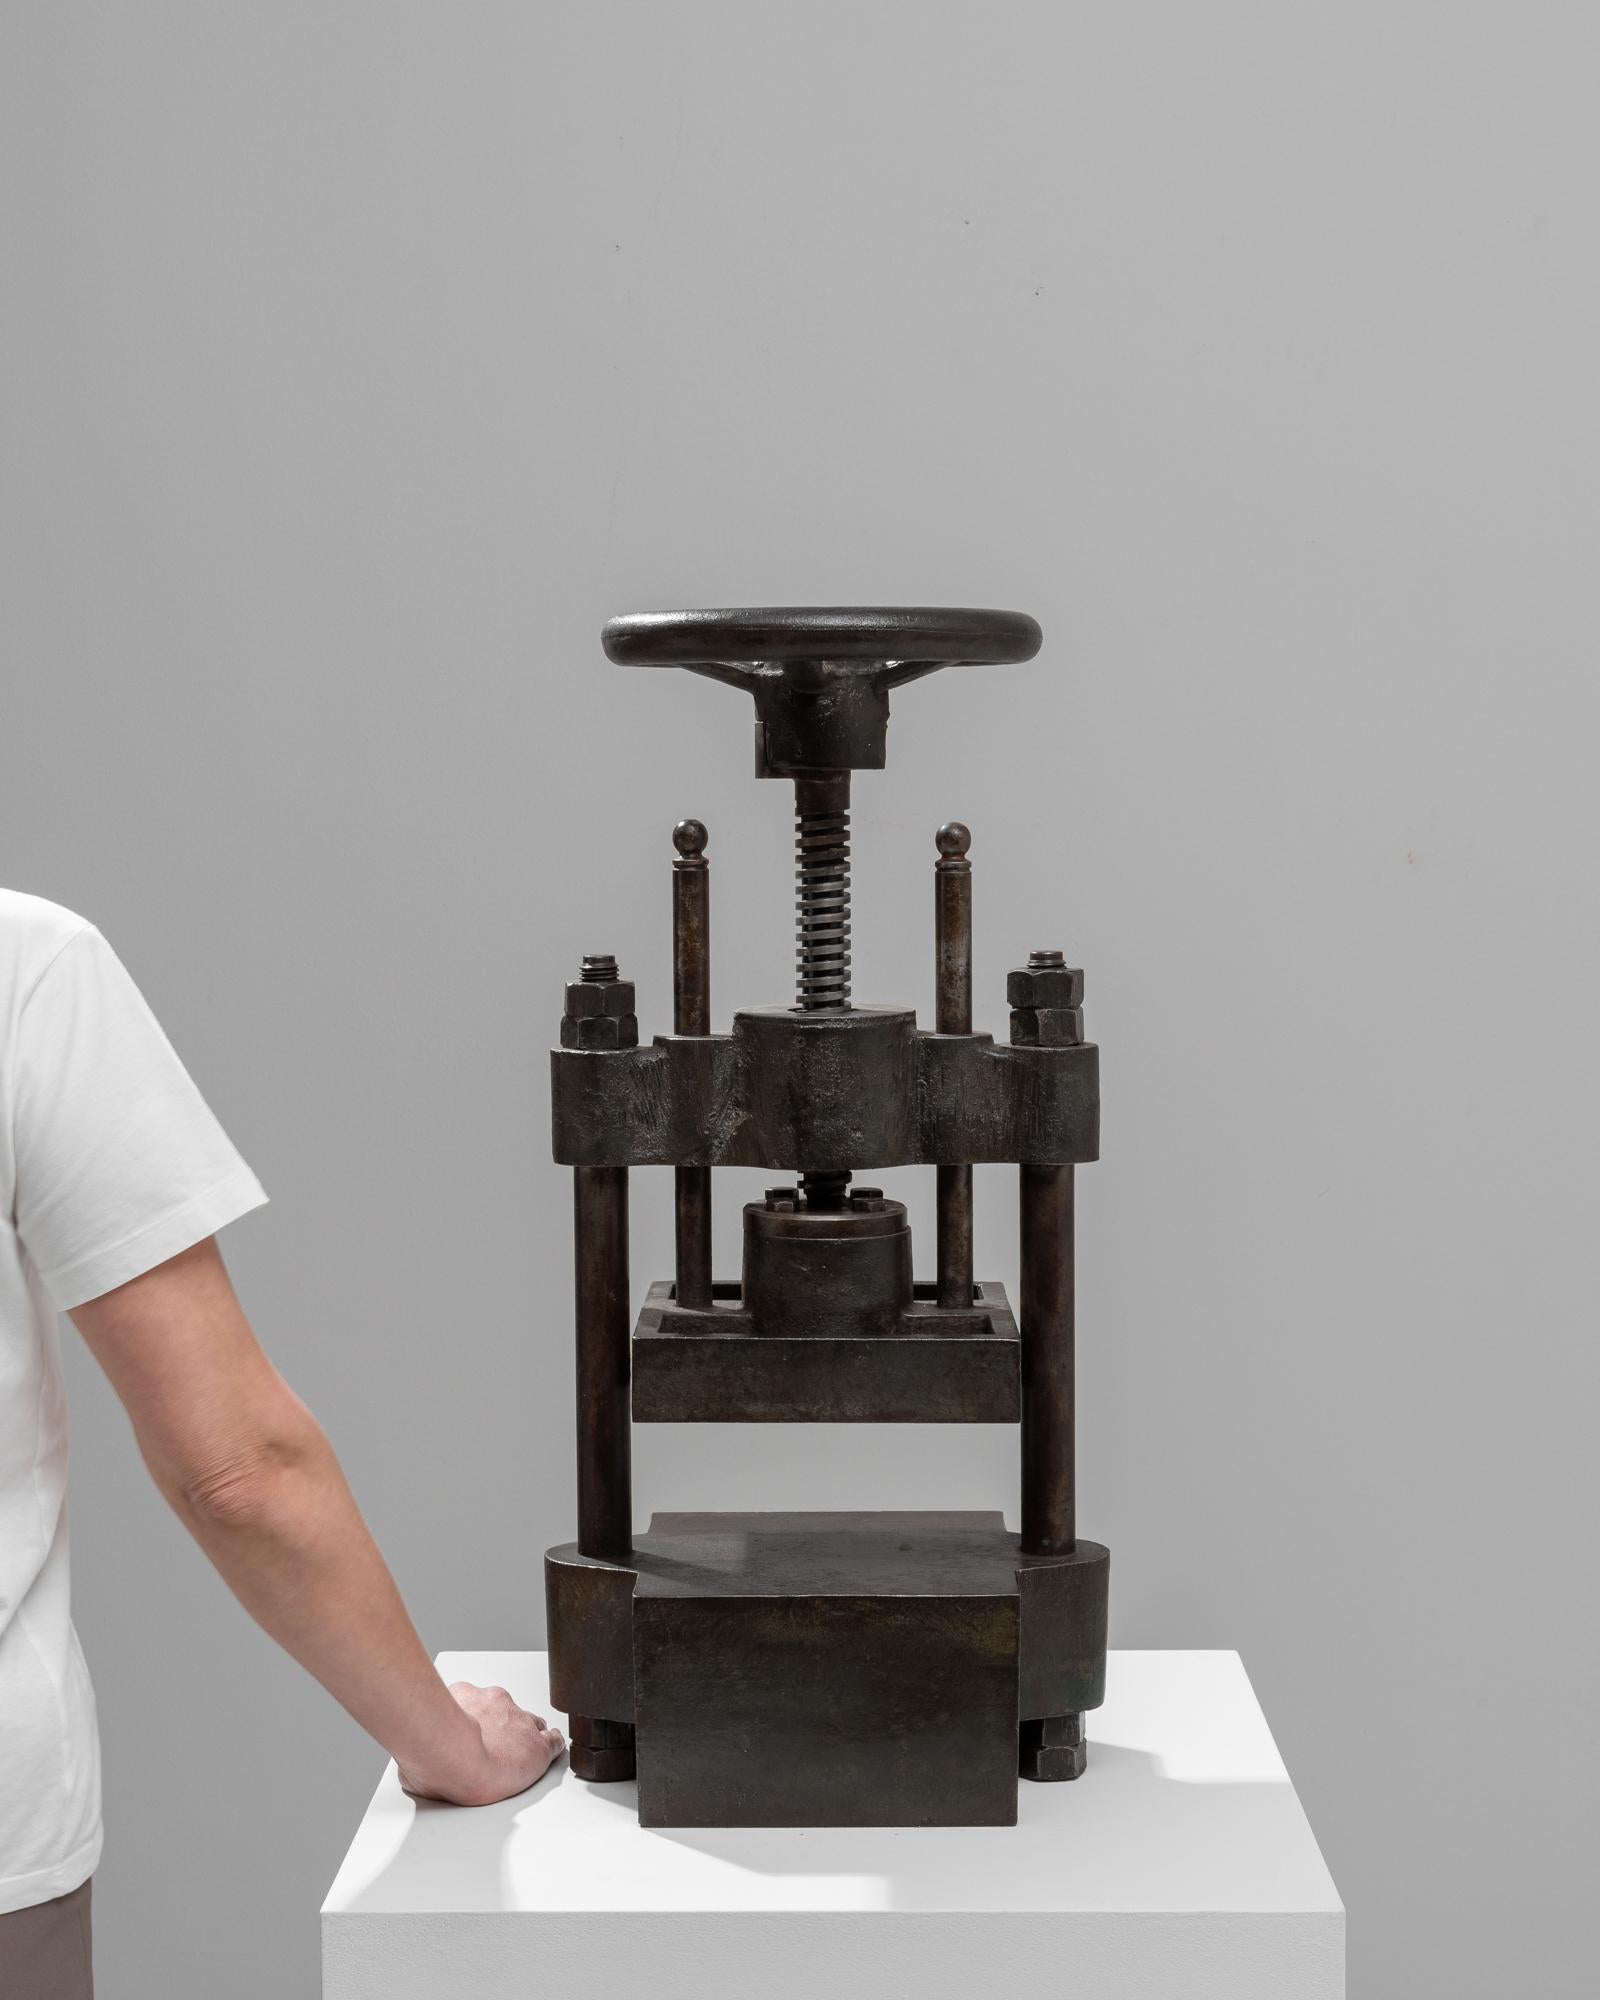 Discover the rugged charm of industrial design with this early 20th-century Belgian cast iron press. Designed to withstand the demands of heavy use, this piece is constructed from robust cast iron, featuring a sturdy frame and a bold, mechanical